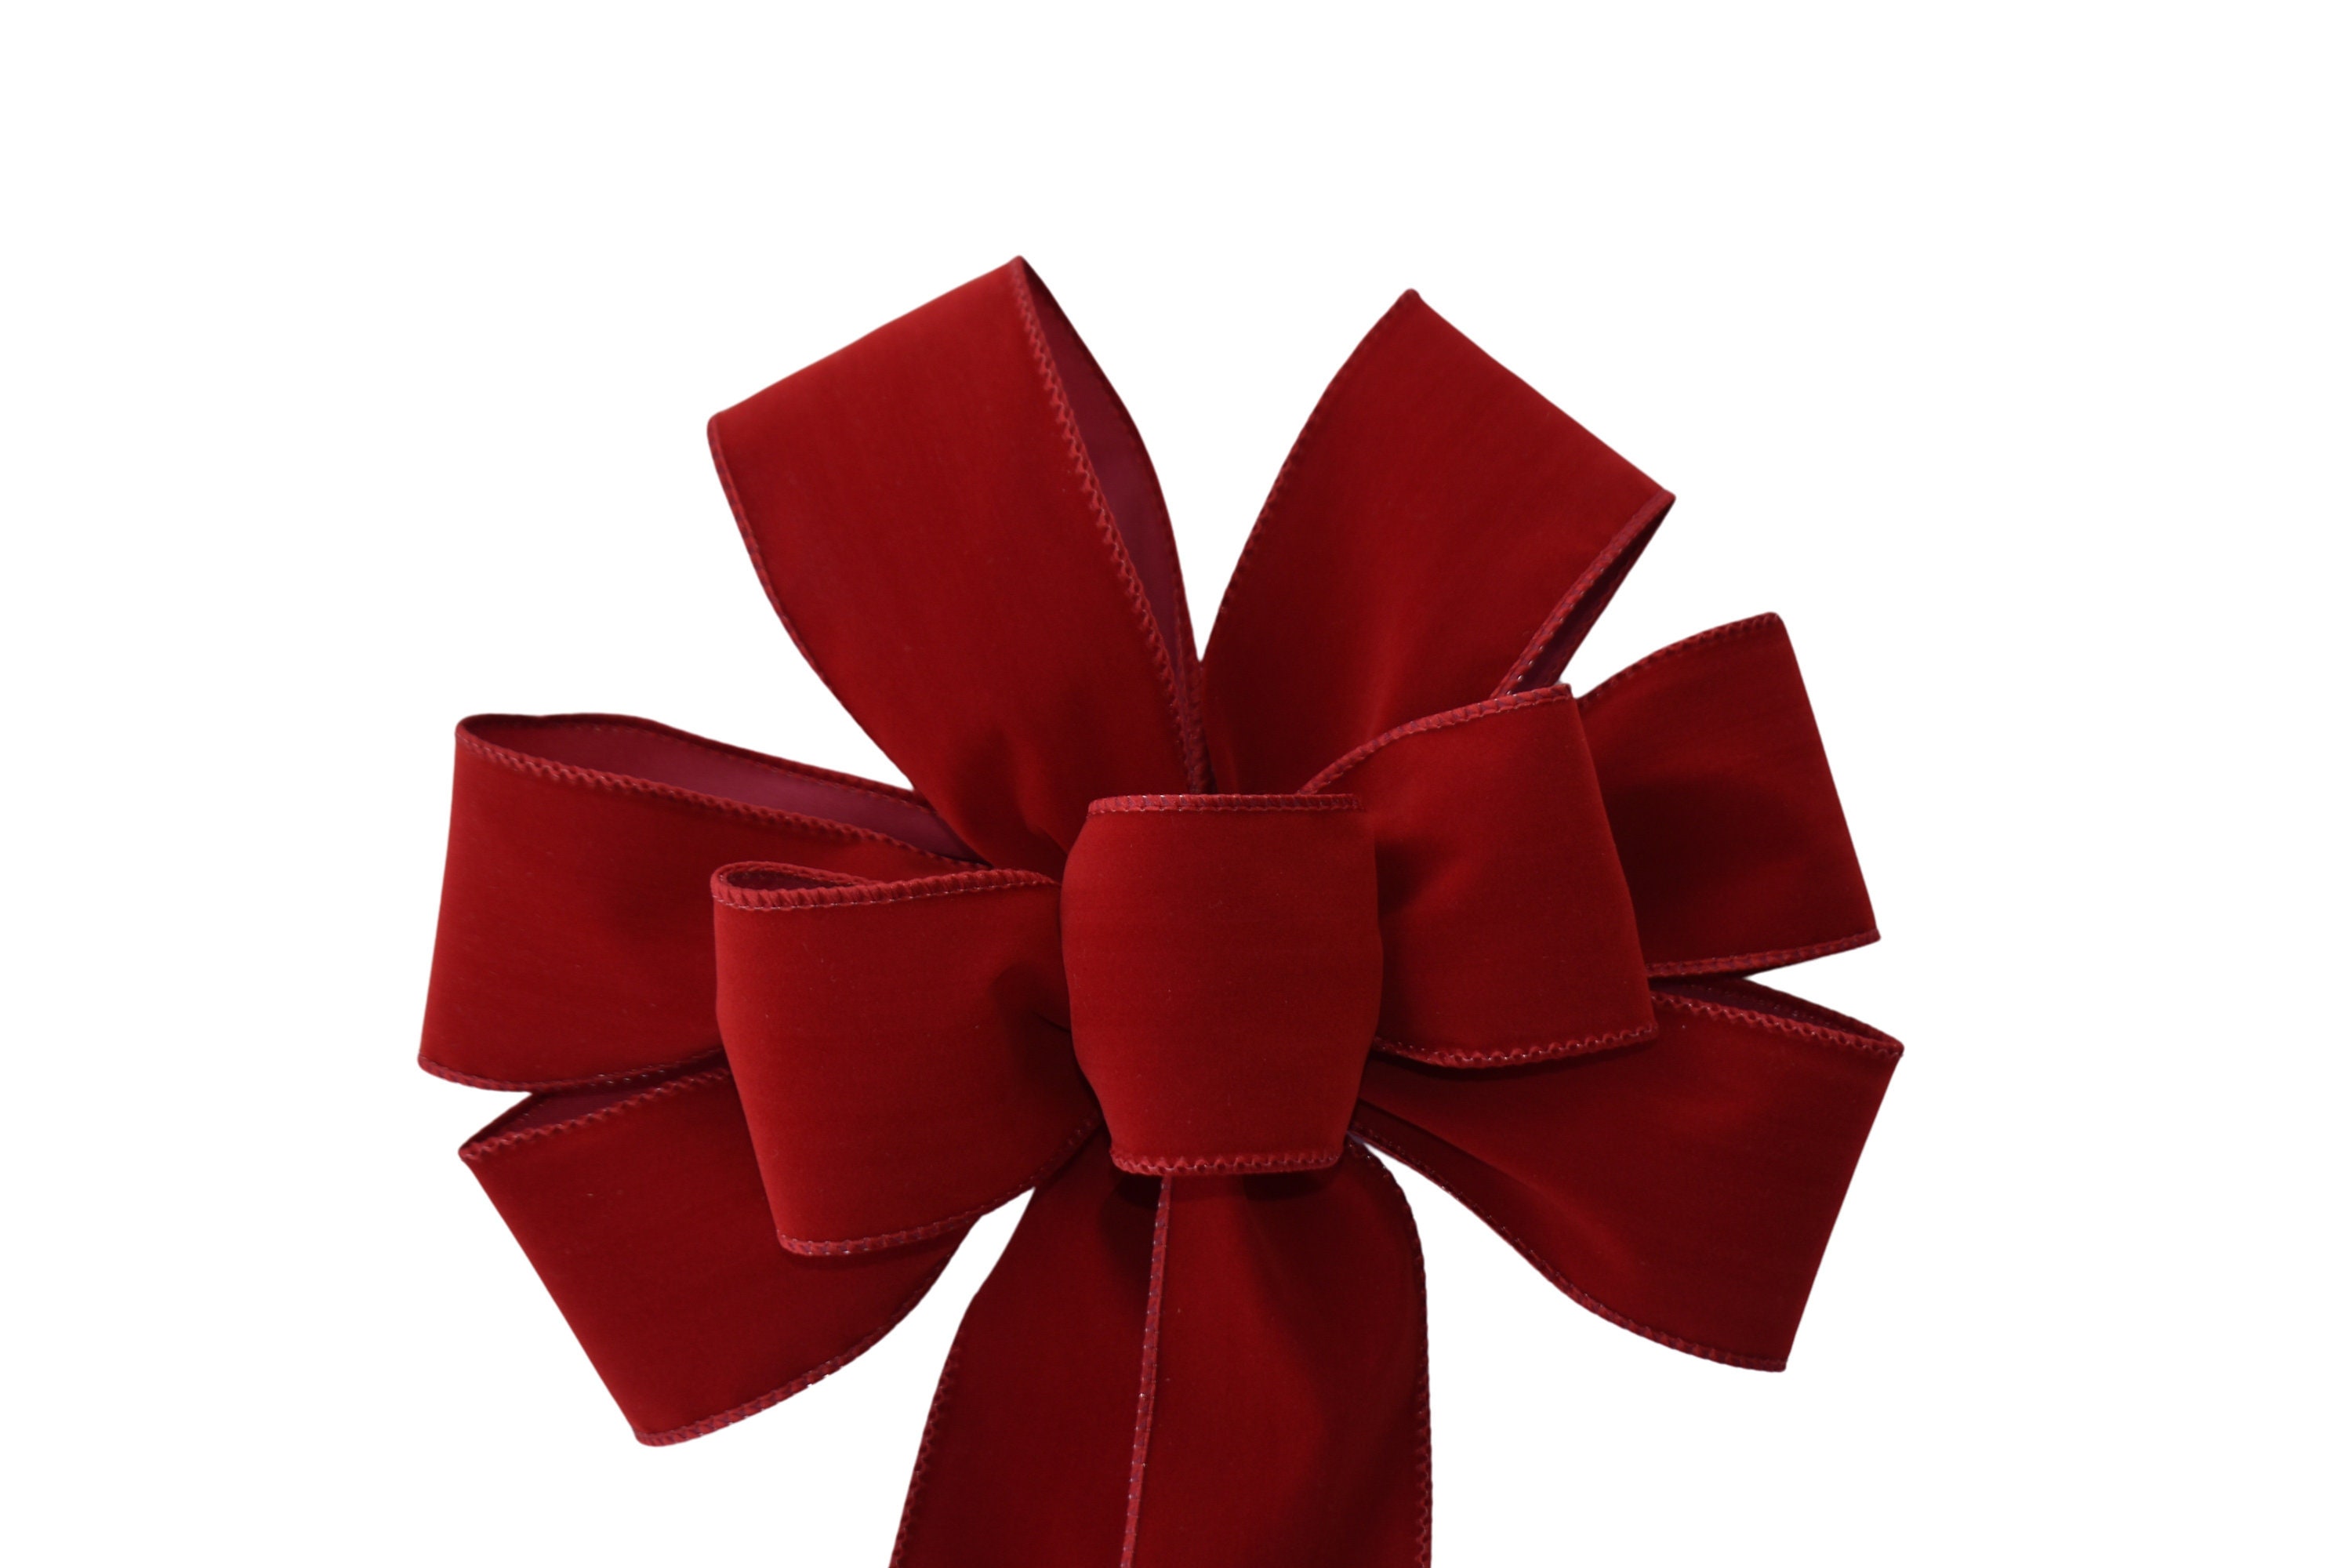 Small Christmas Bows - Wired Indoor Outdoor Berry Red Velvet Bows 5 Inch